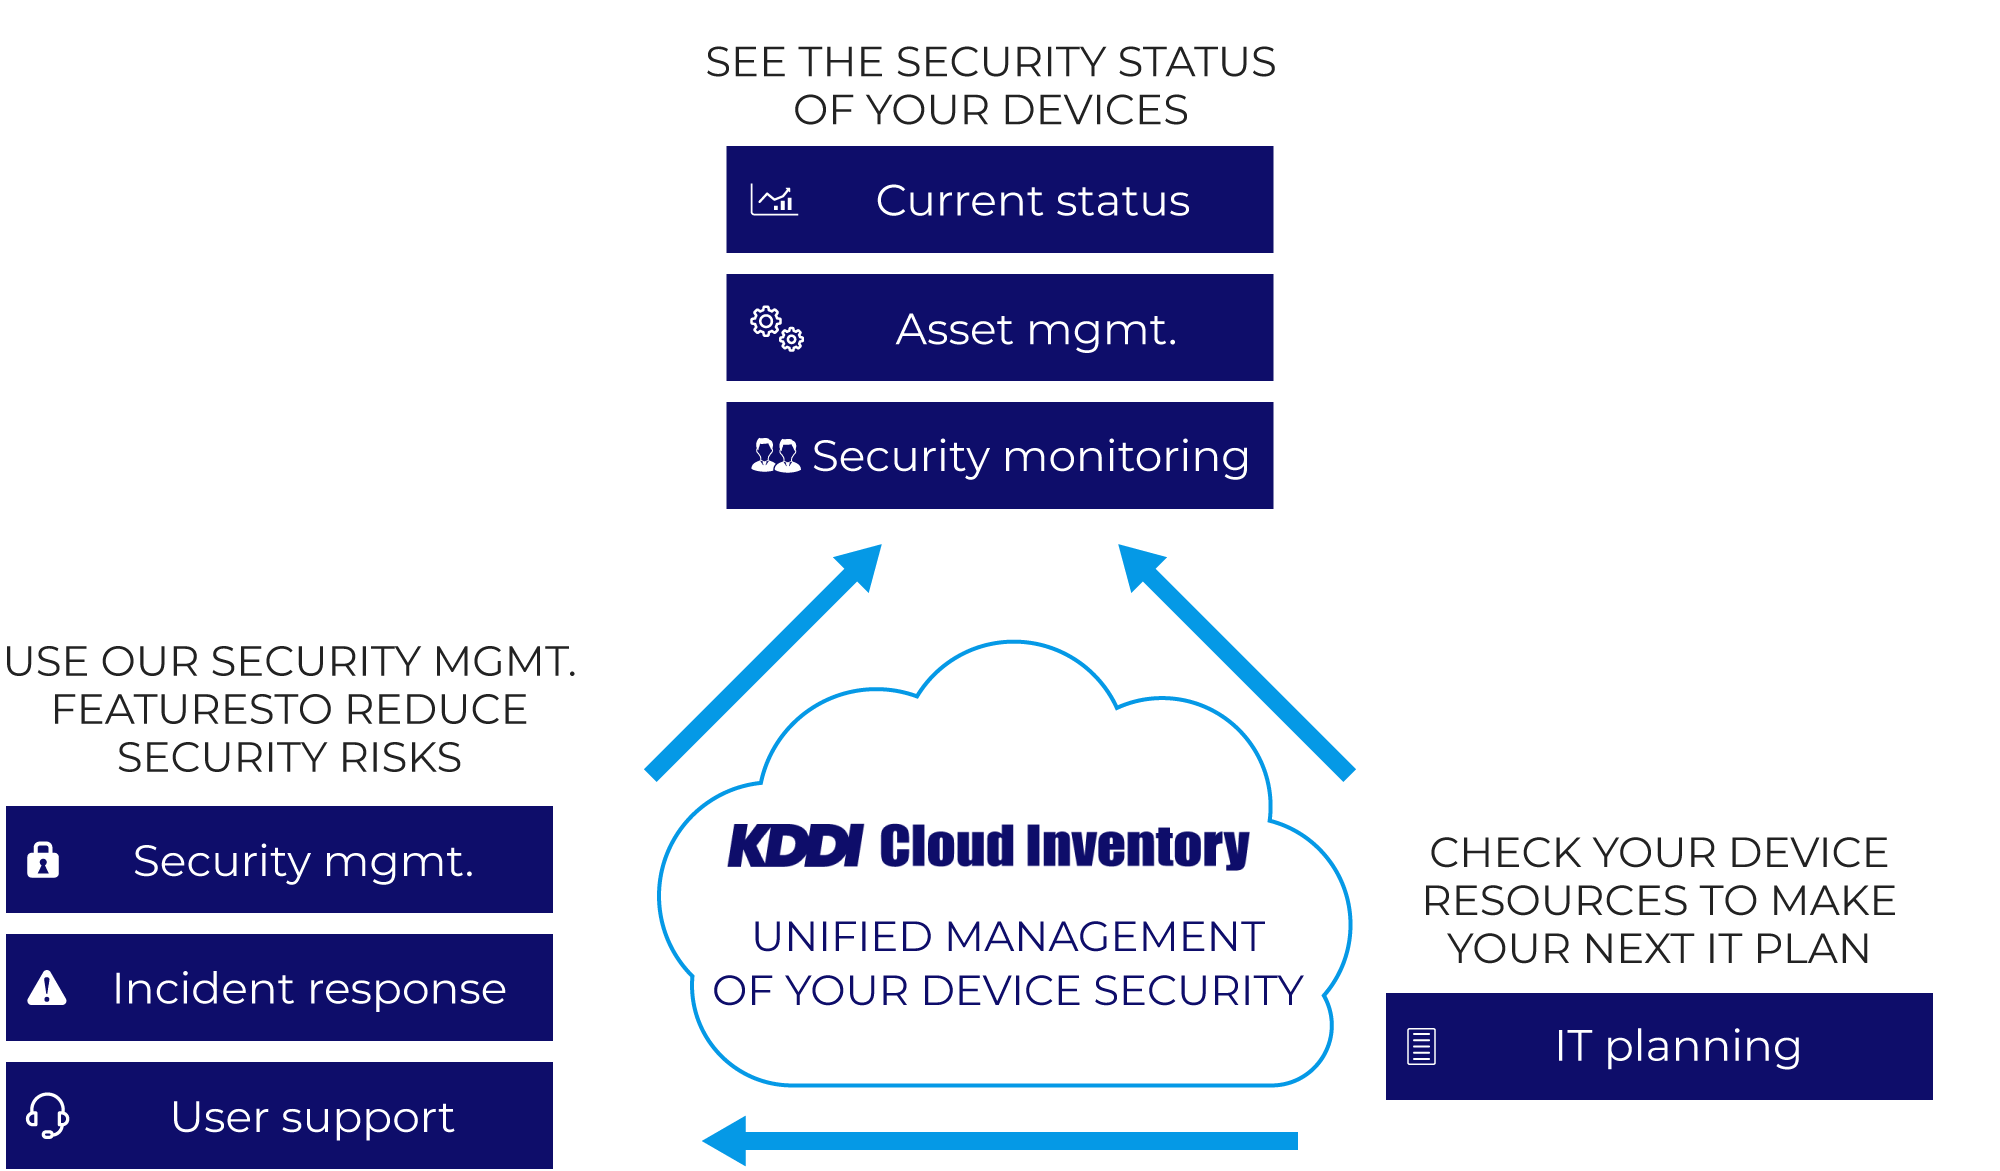 UNIFIED MANAGEMENT OF YOUR DEVICE SECURITY